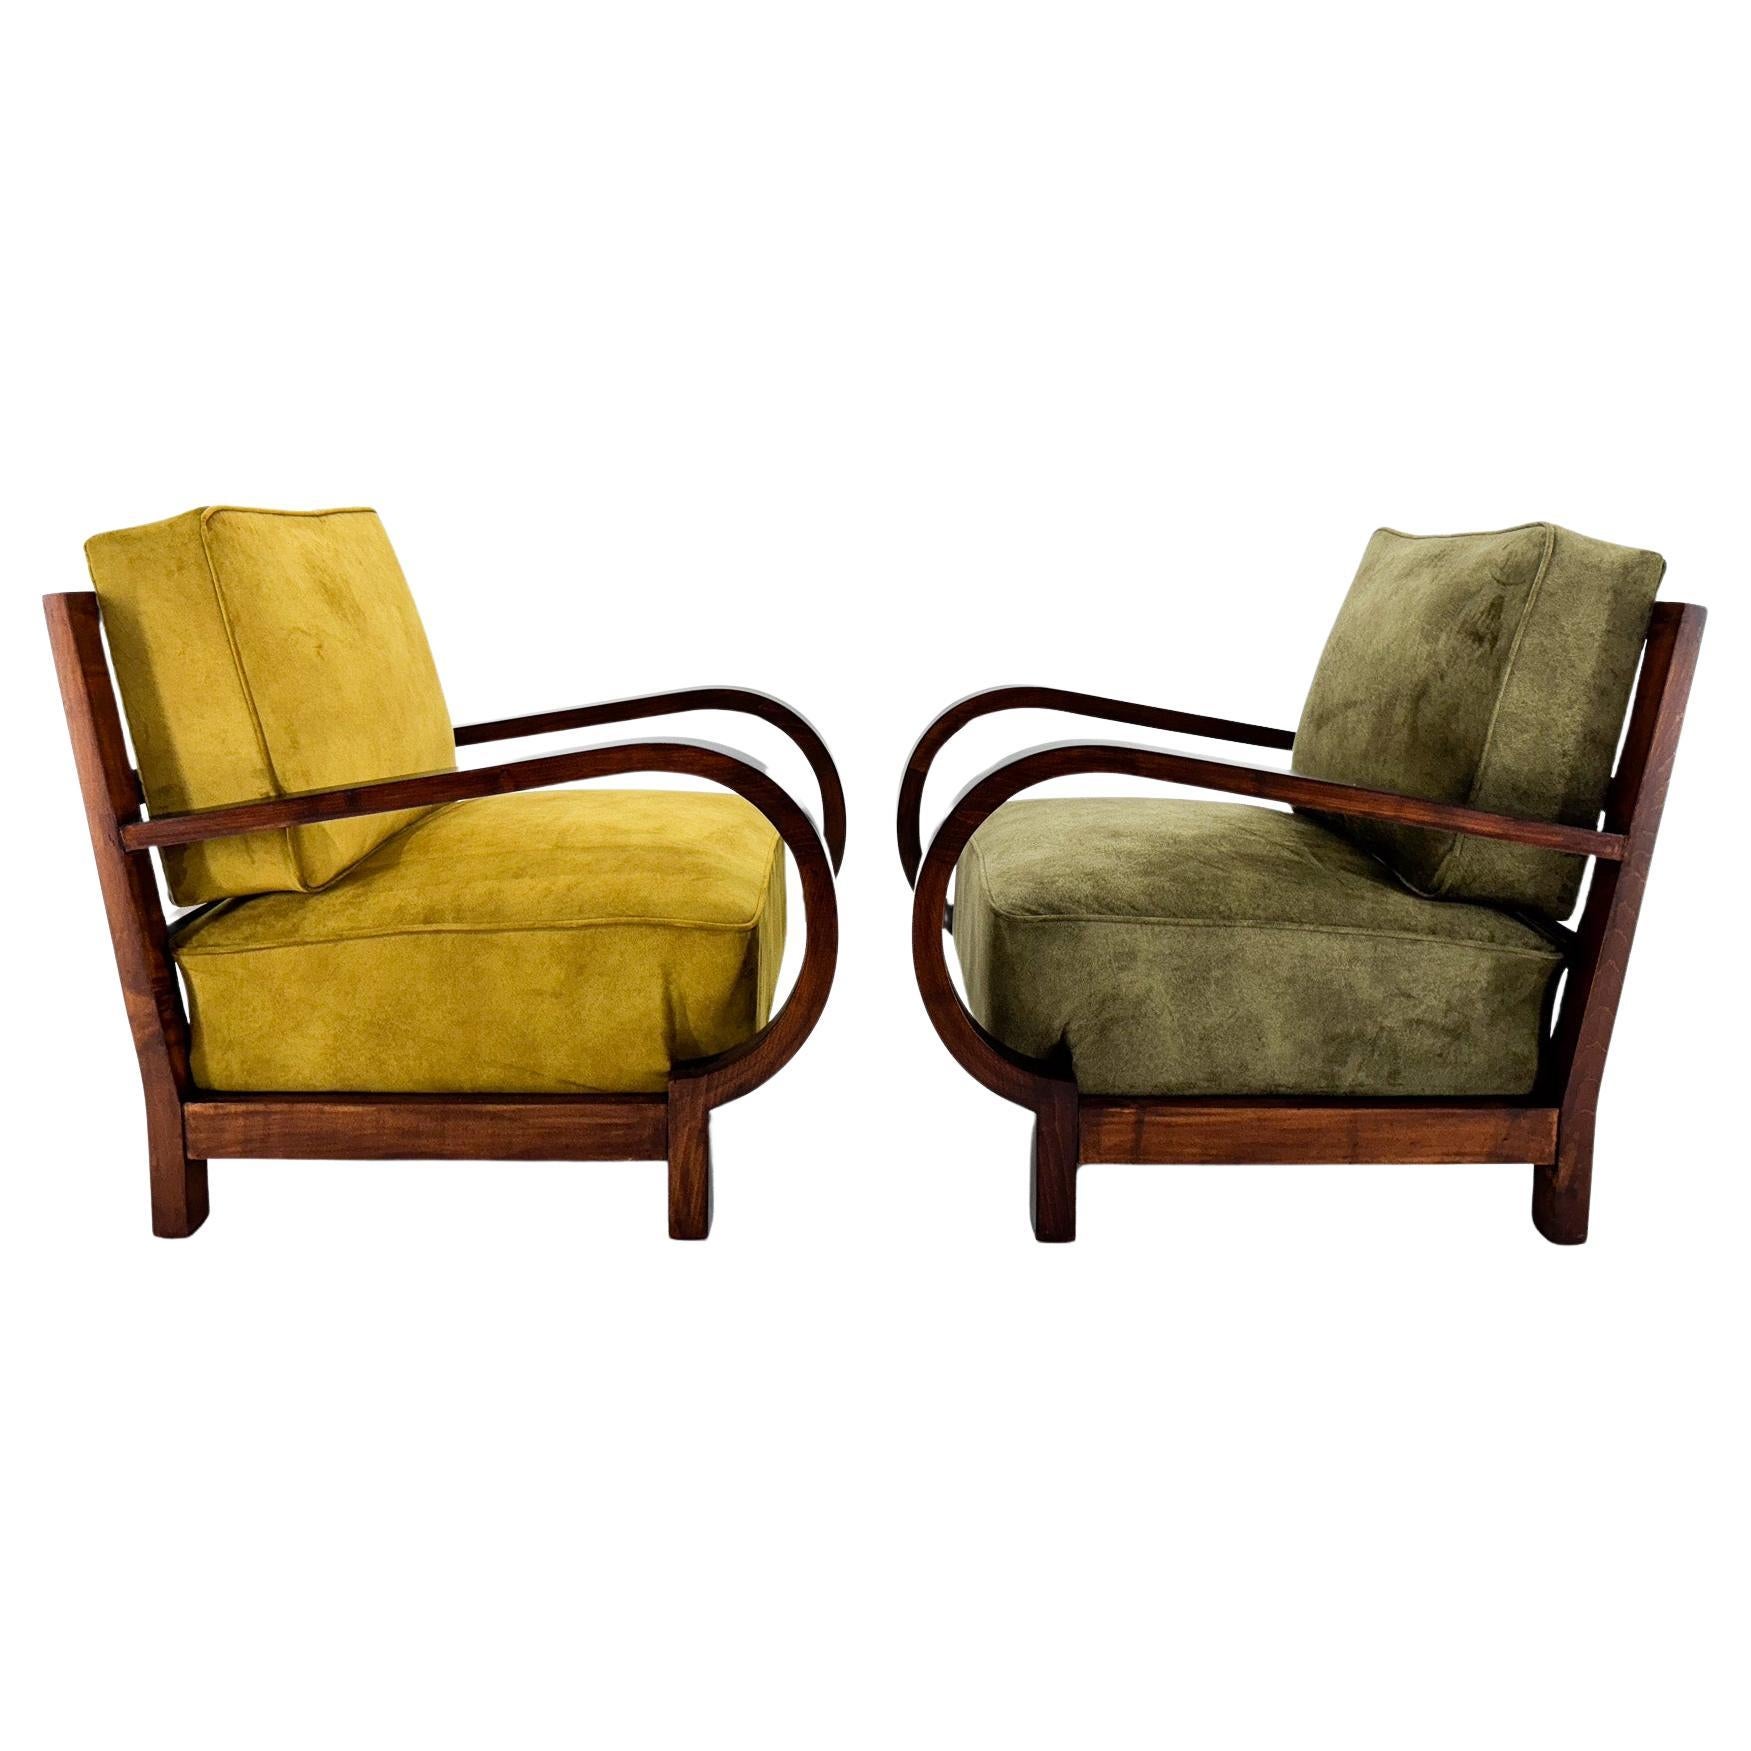 Pair of Art Deco Beech Wood Armchairs, 1930's, Newly Upholstered For Sale